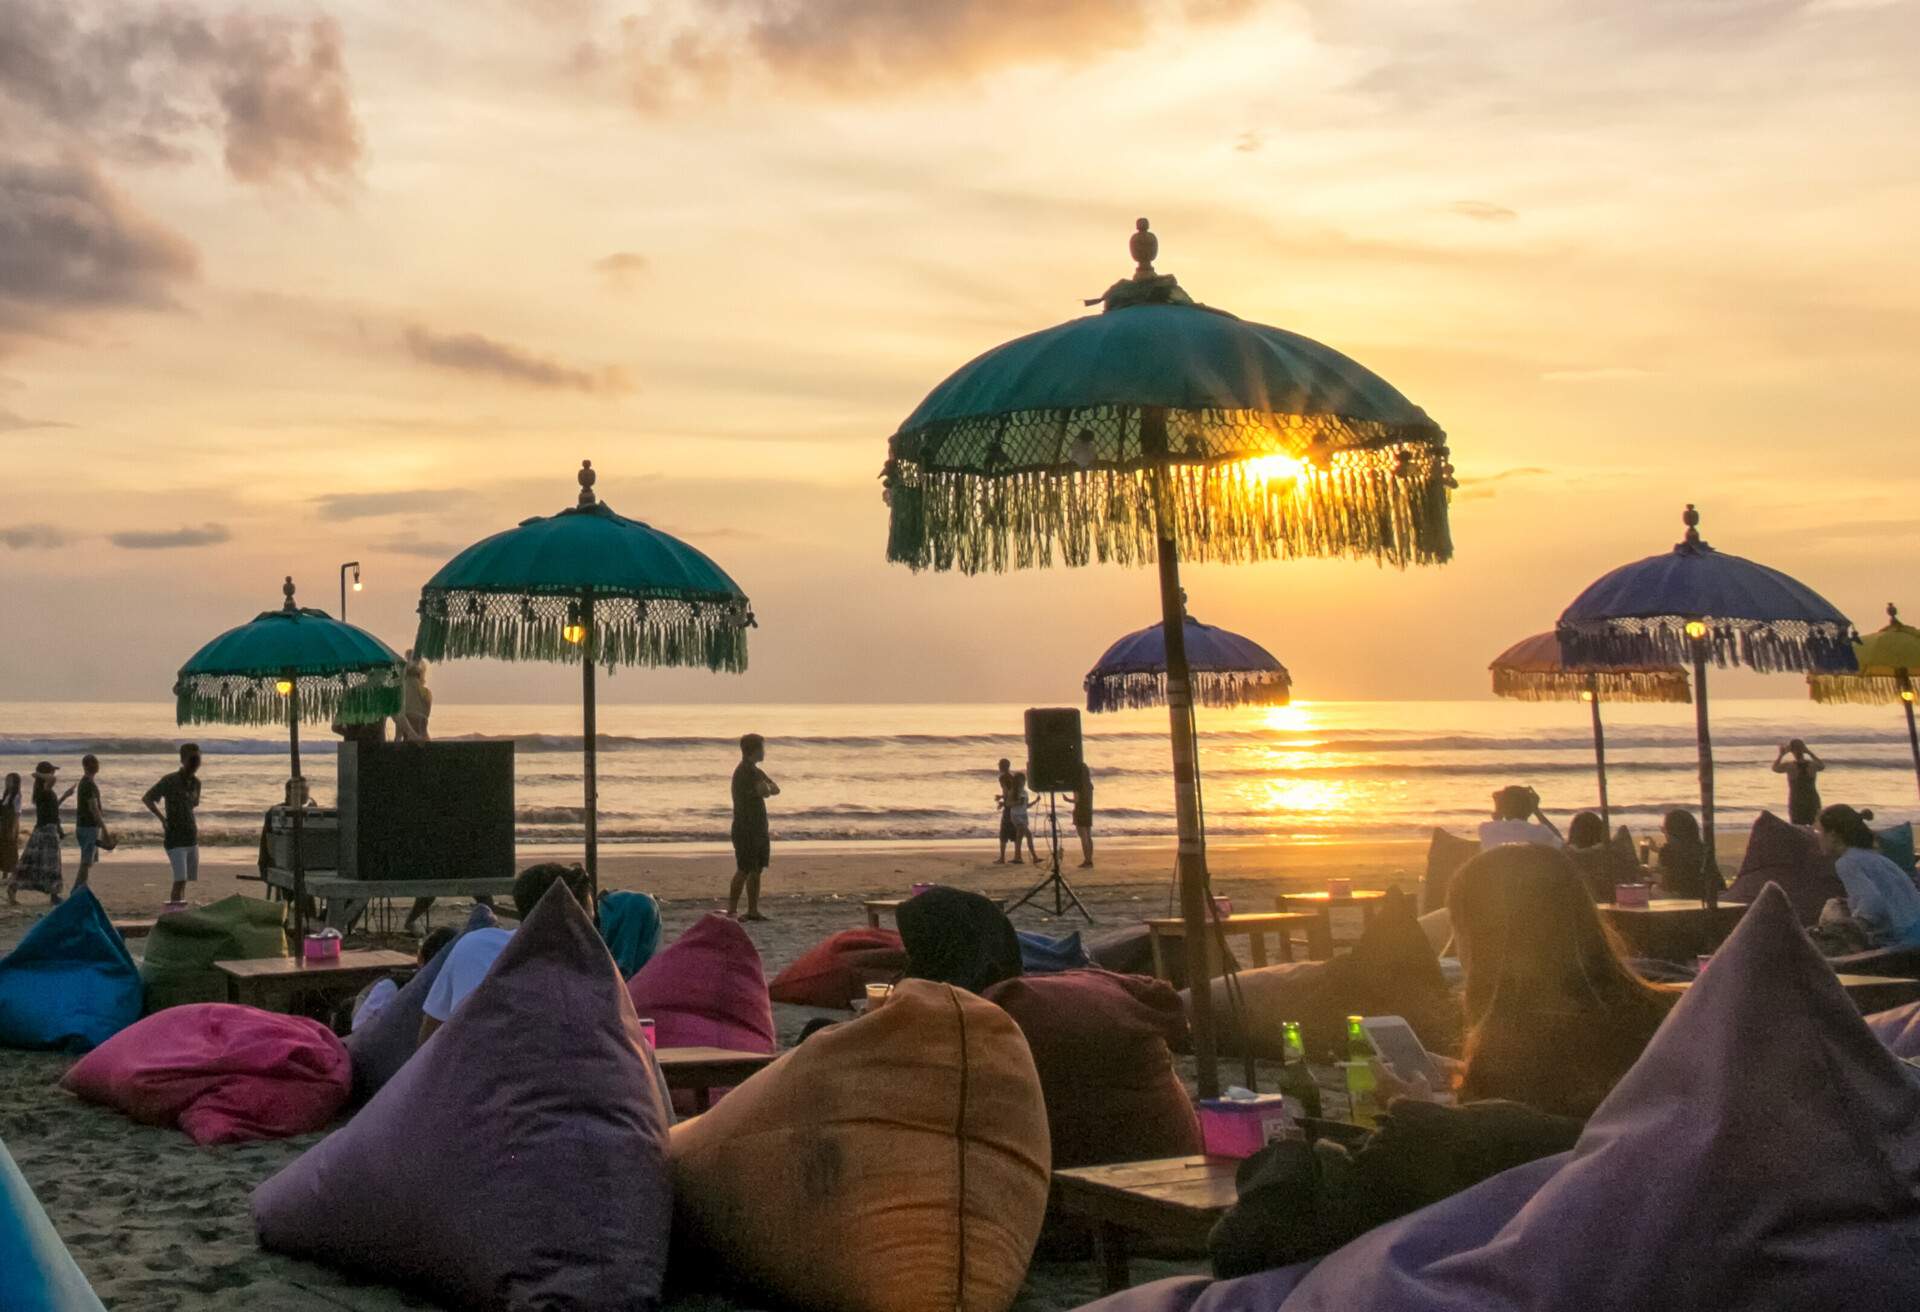 Sunset scene of Seminyak Beach Bali, Indonesia. Features a relaxed coastal ambiance.